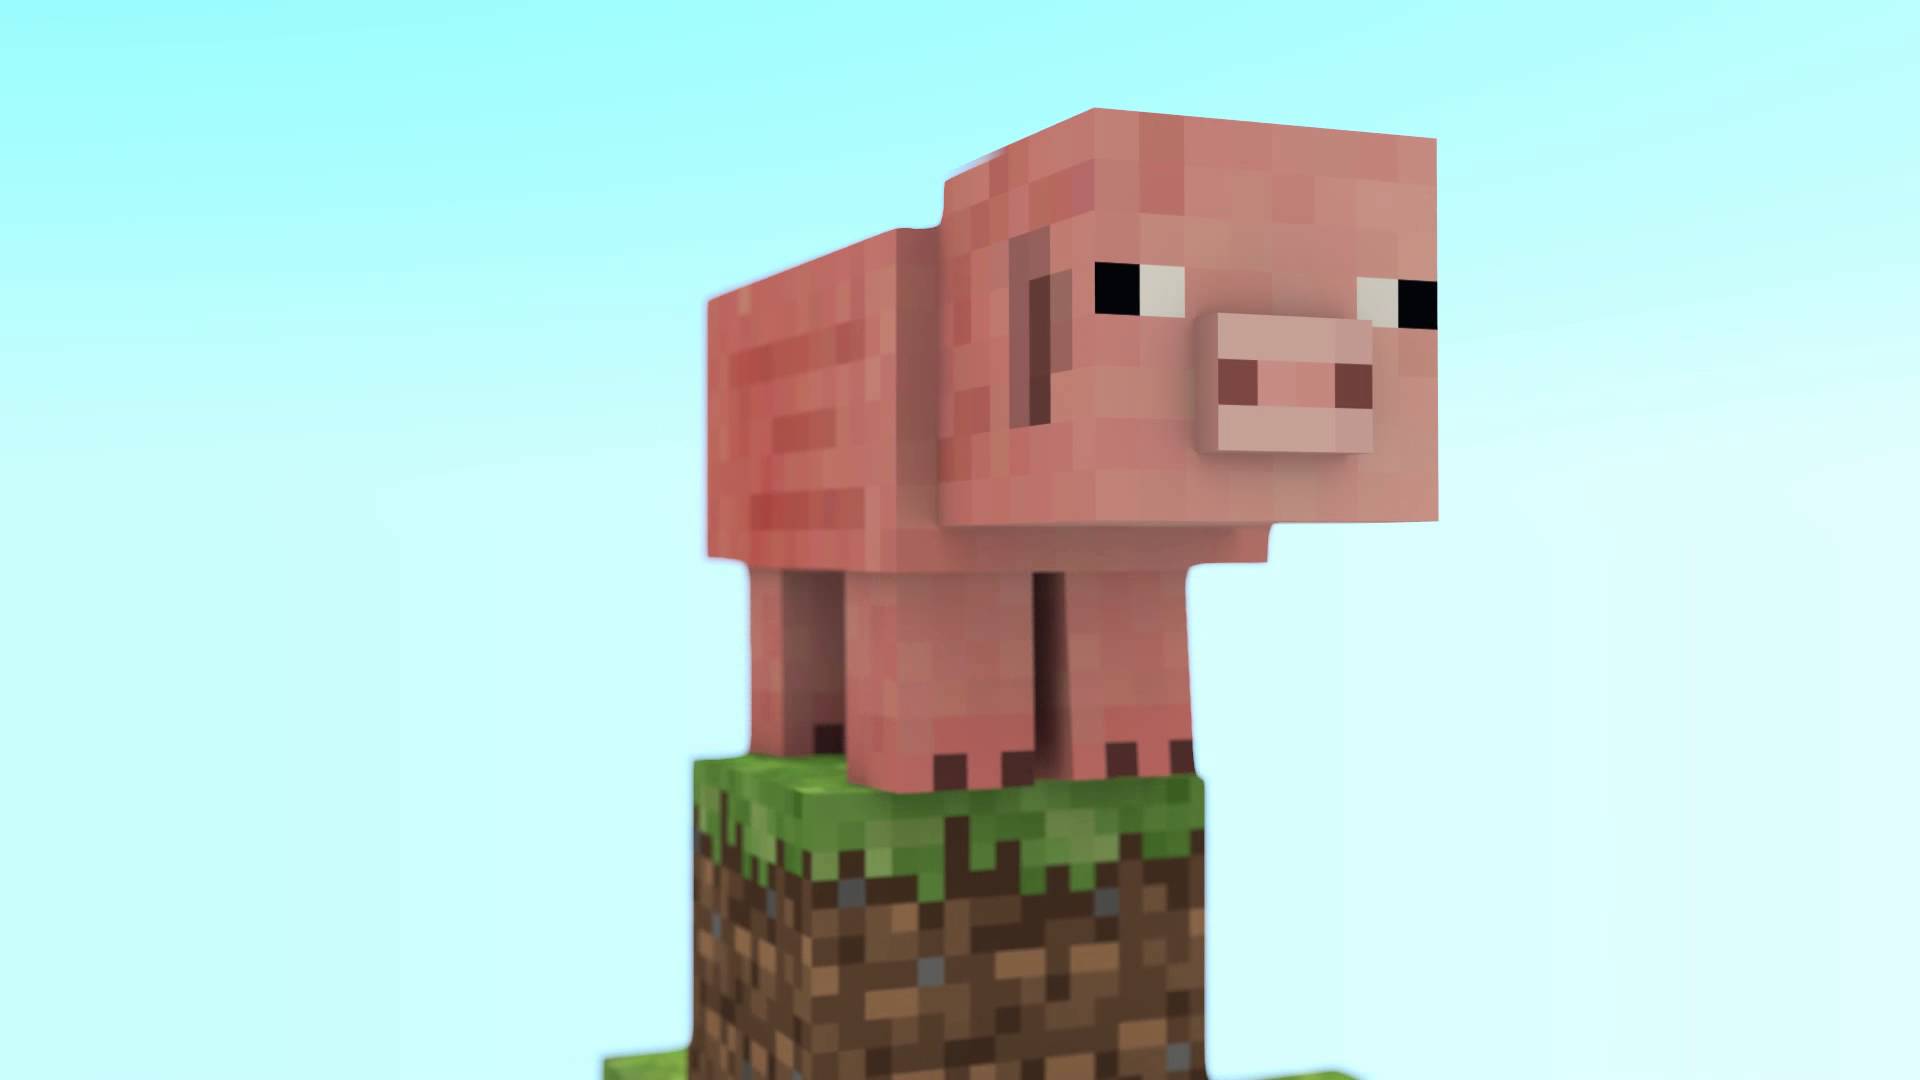 Pig goes walking   A Minecraft animation